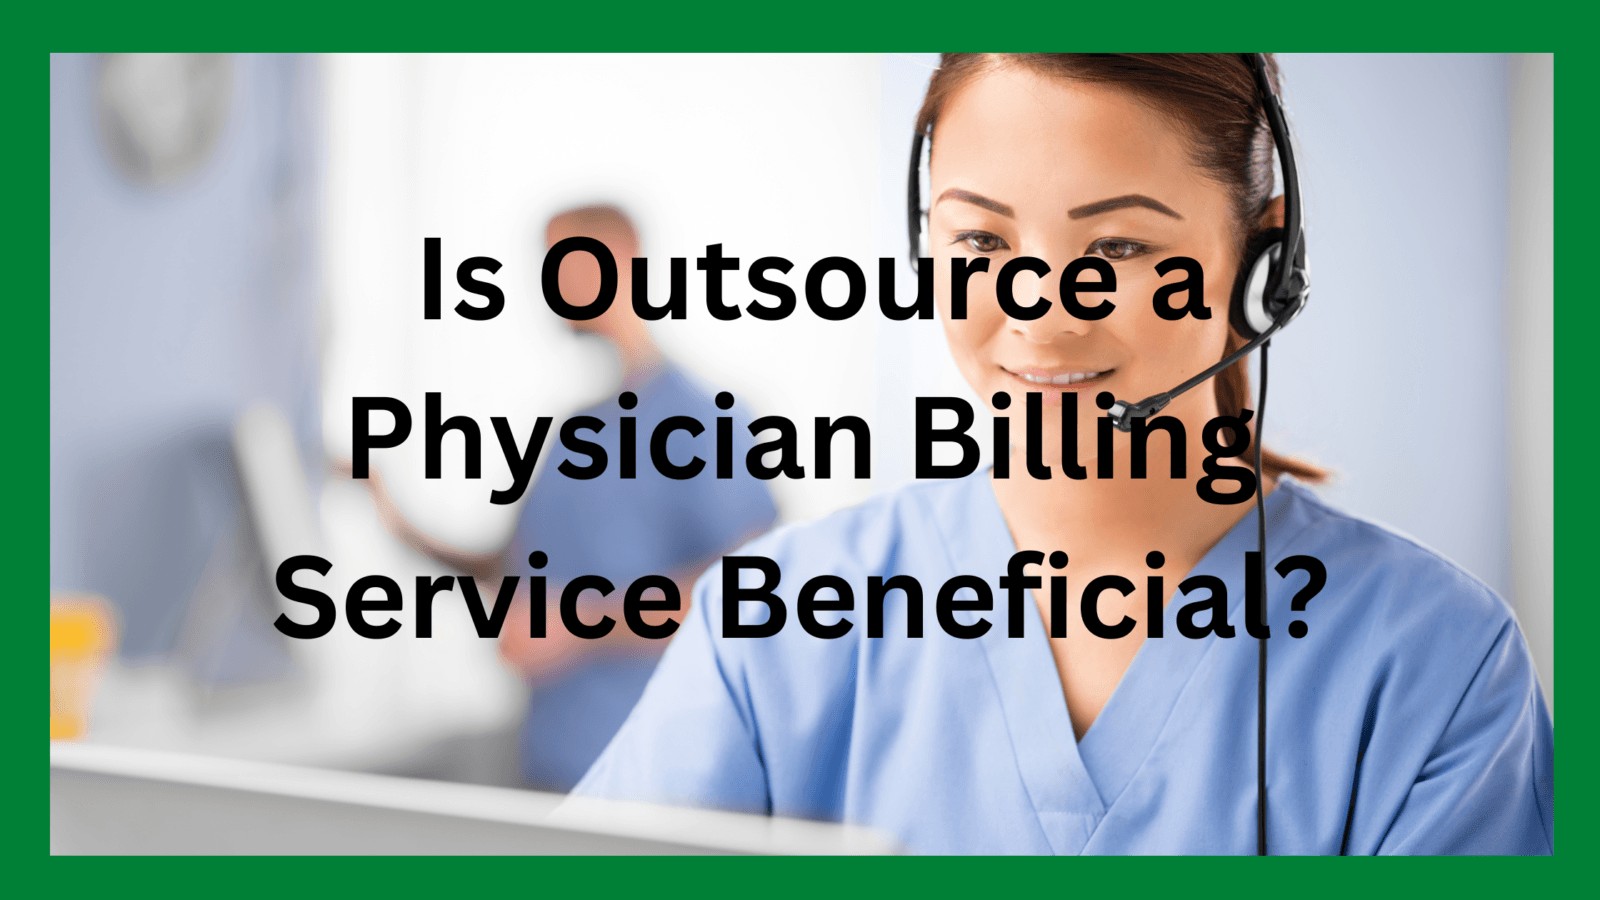 Outsource physician billing service benefits